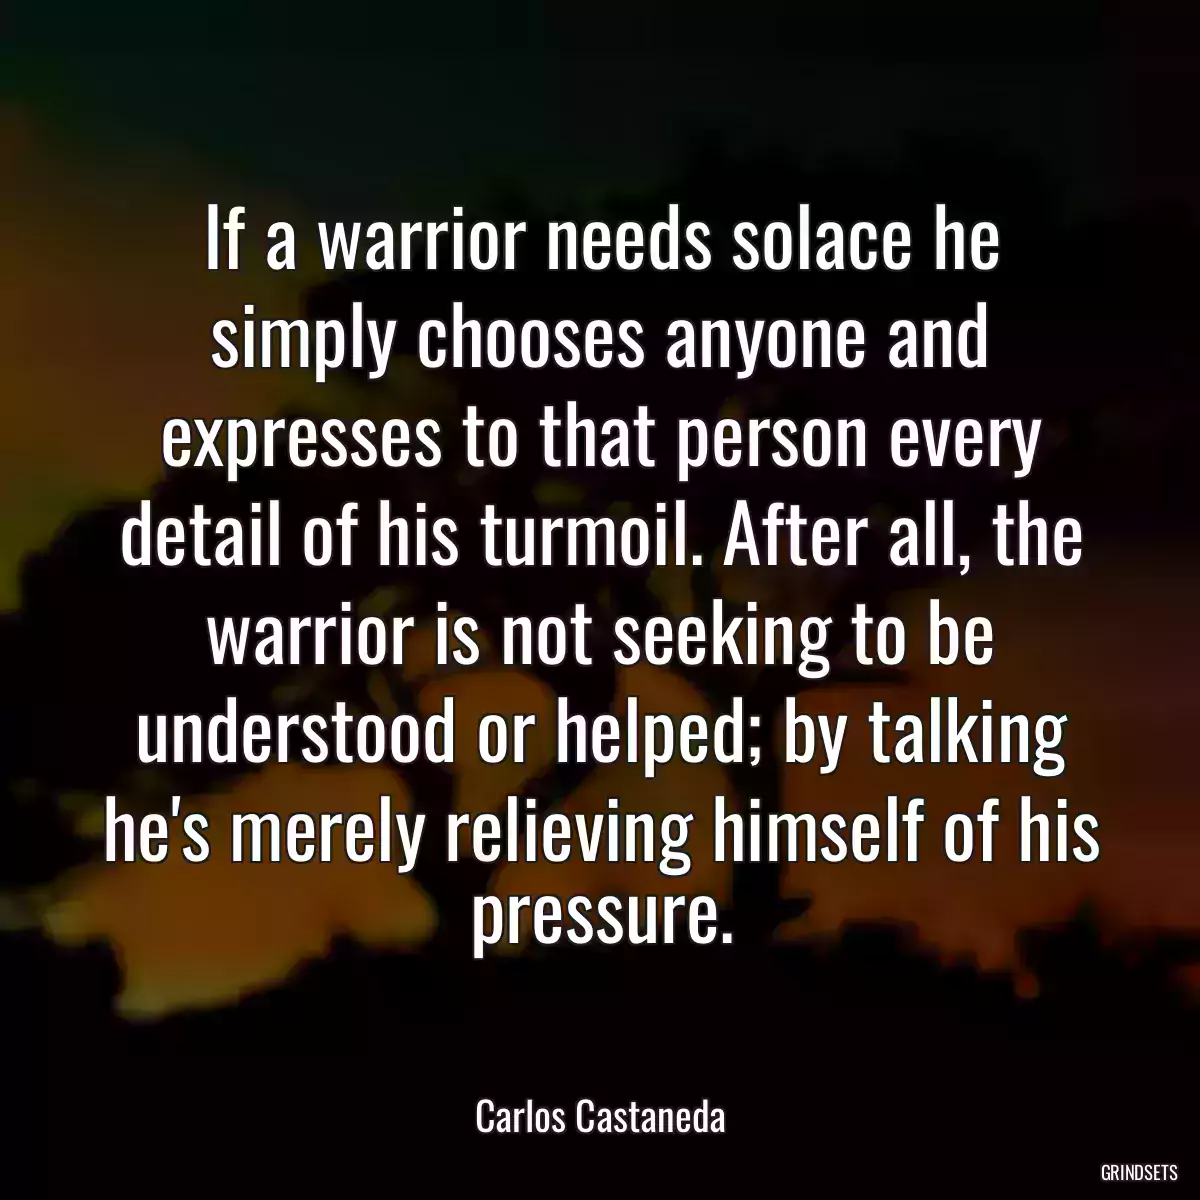 If a warrior needs solace he simply chooses anyone and expresses to that person every detail of his turmoil. After all, the warrior is not seeking to be understood or helped; by talking he\'s merely relieving himself of his pressure.